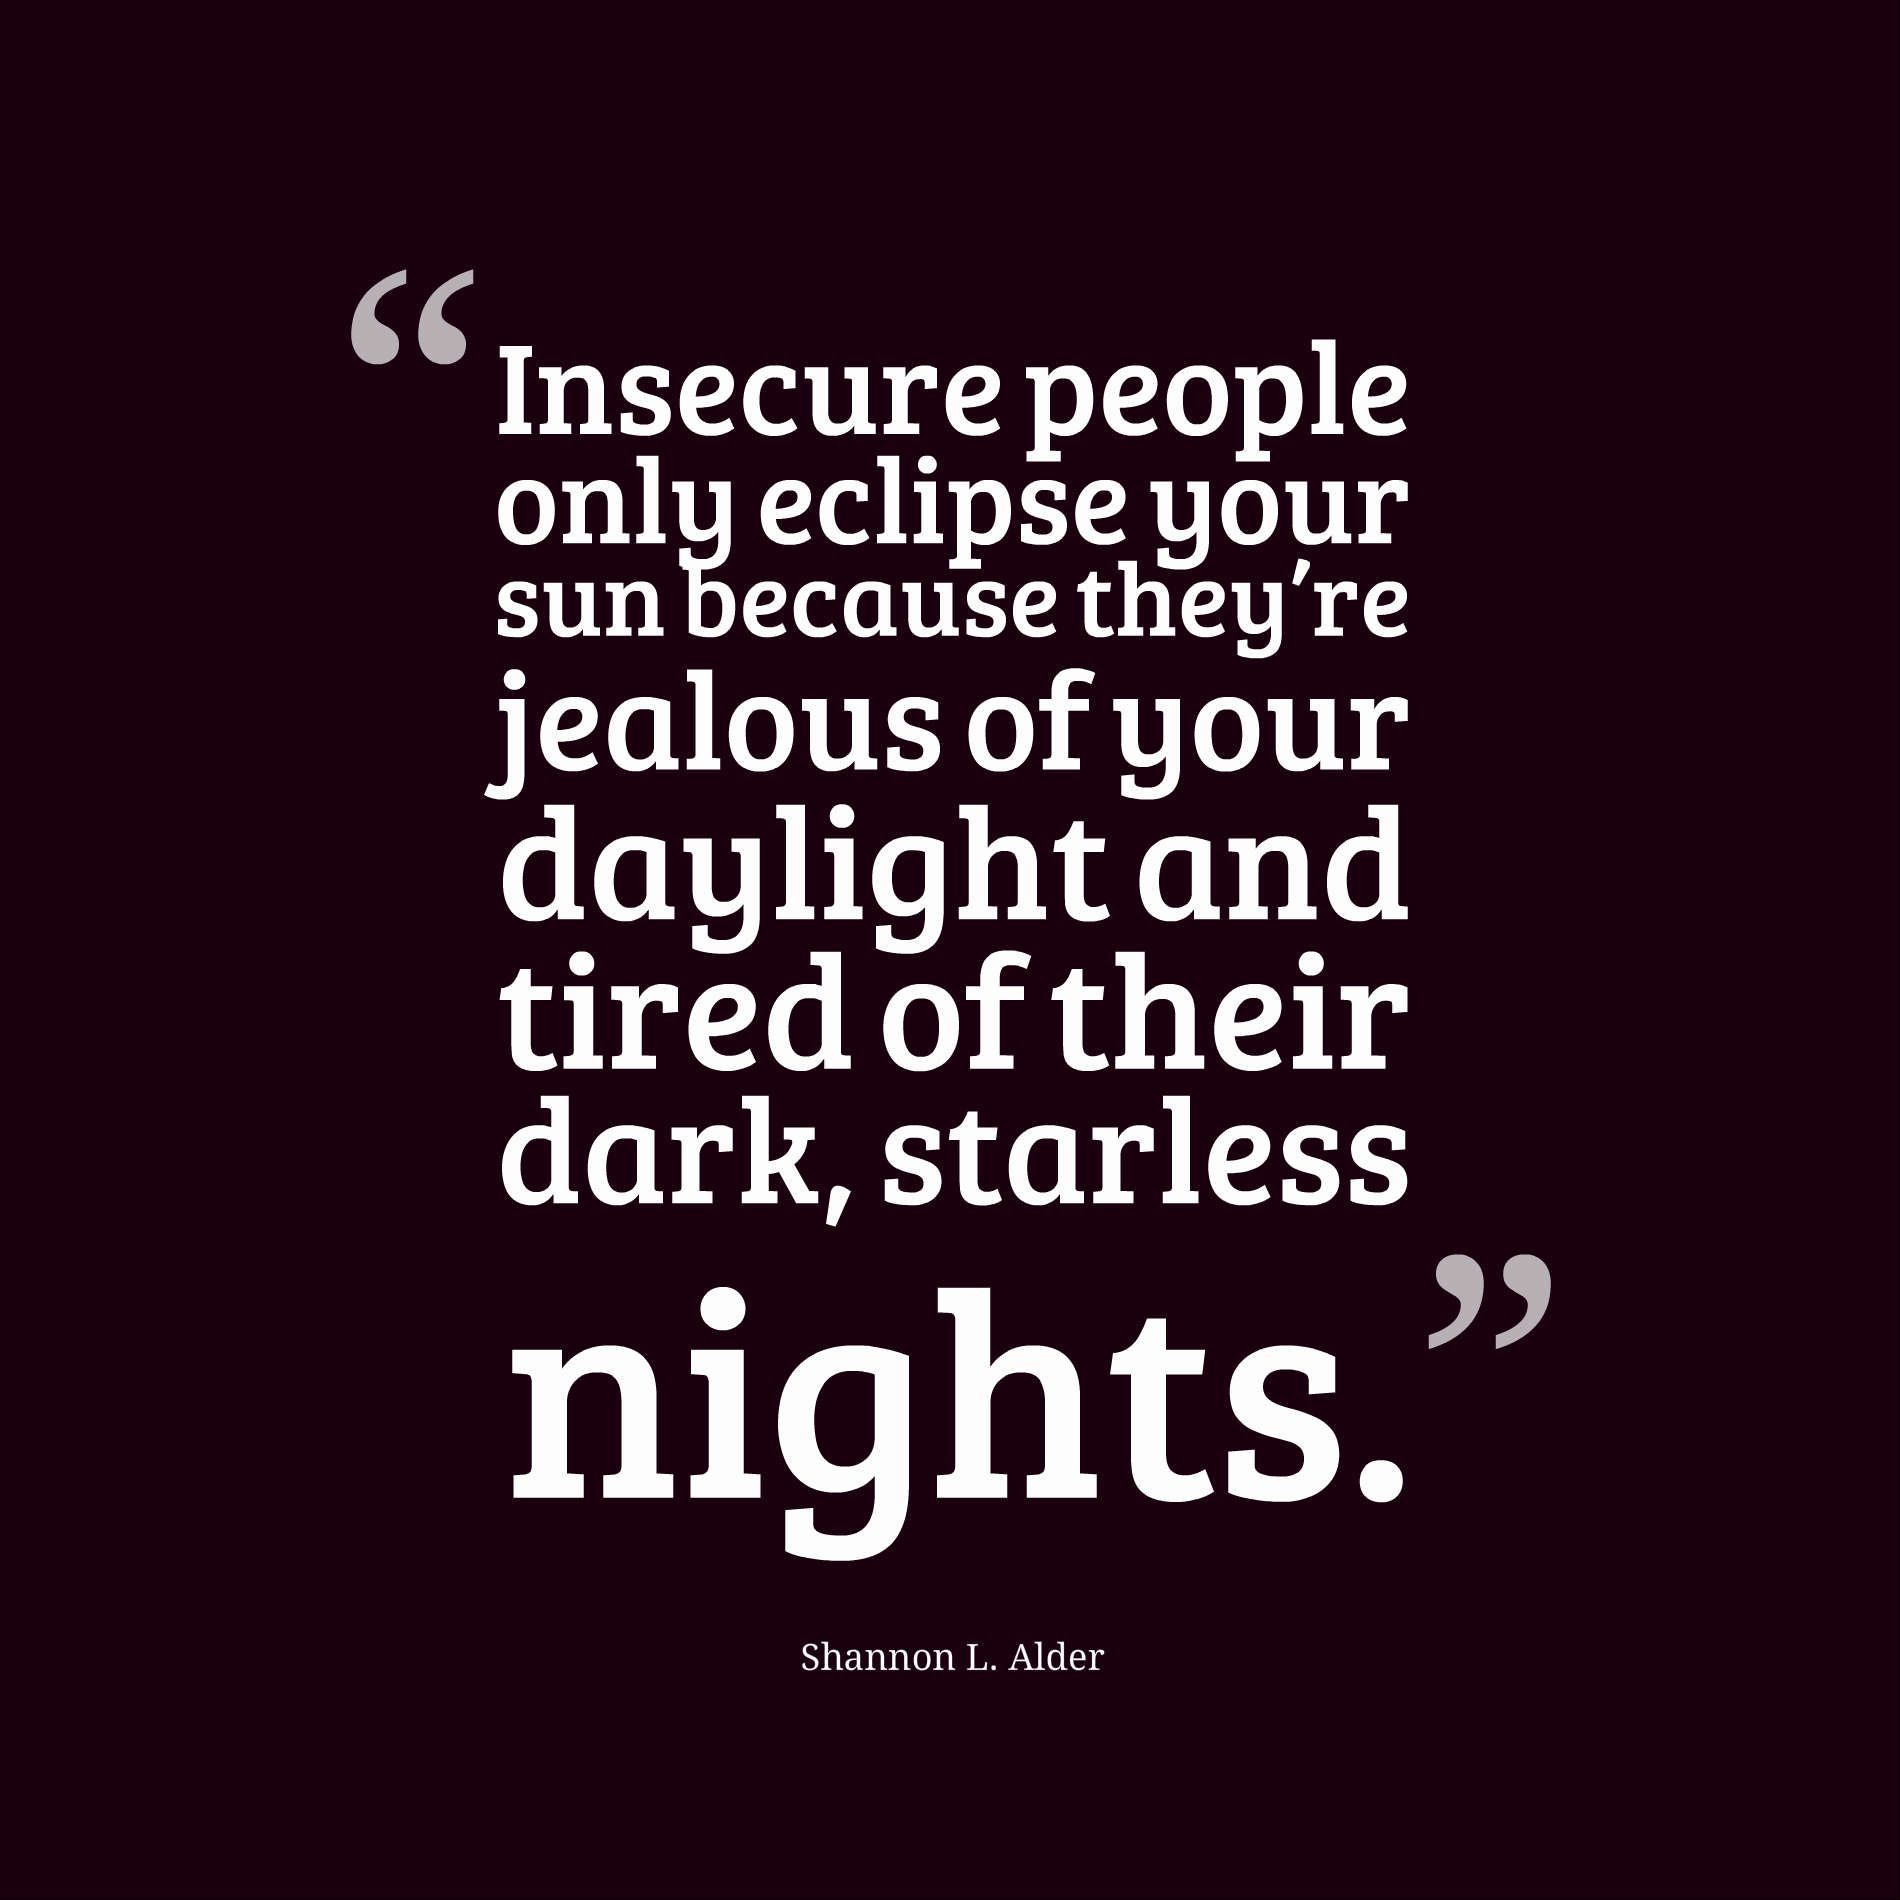 Insecure people only eclipse your sun because they’re jealous of your daylight and tired of their dark, starless nights.